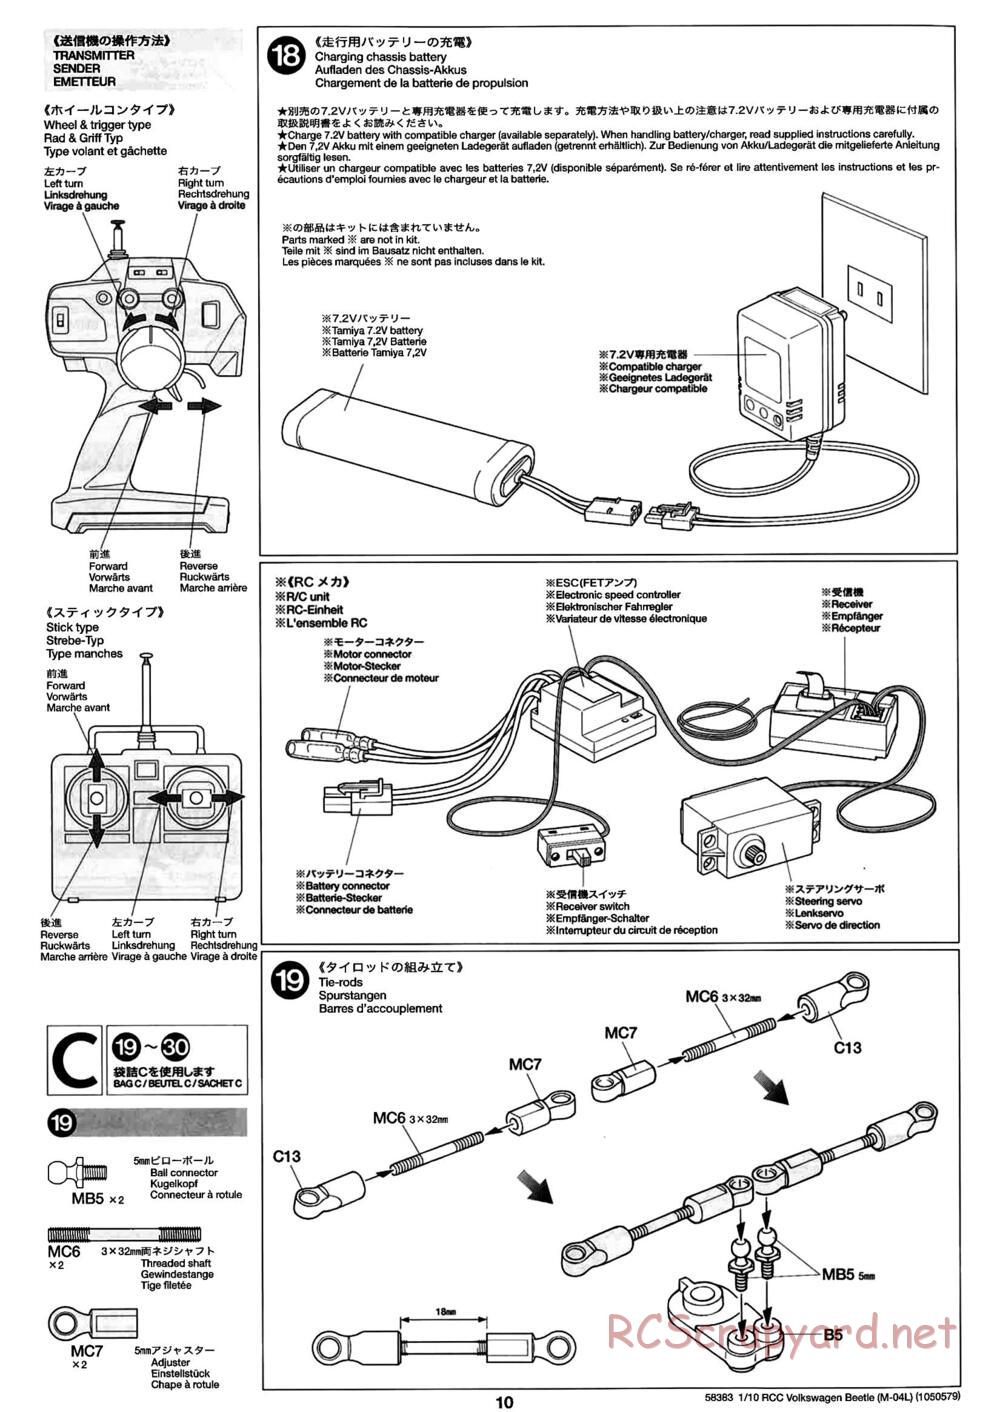 Tamiya - Volkswagen Beetle - M04L Chassis - Manual - Page 10